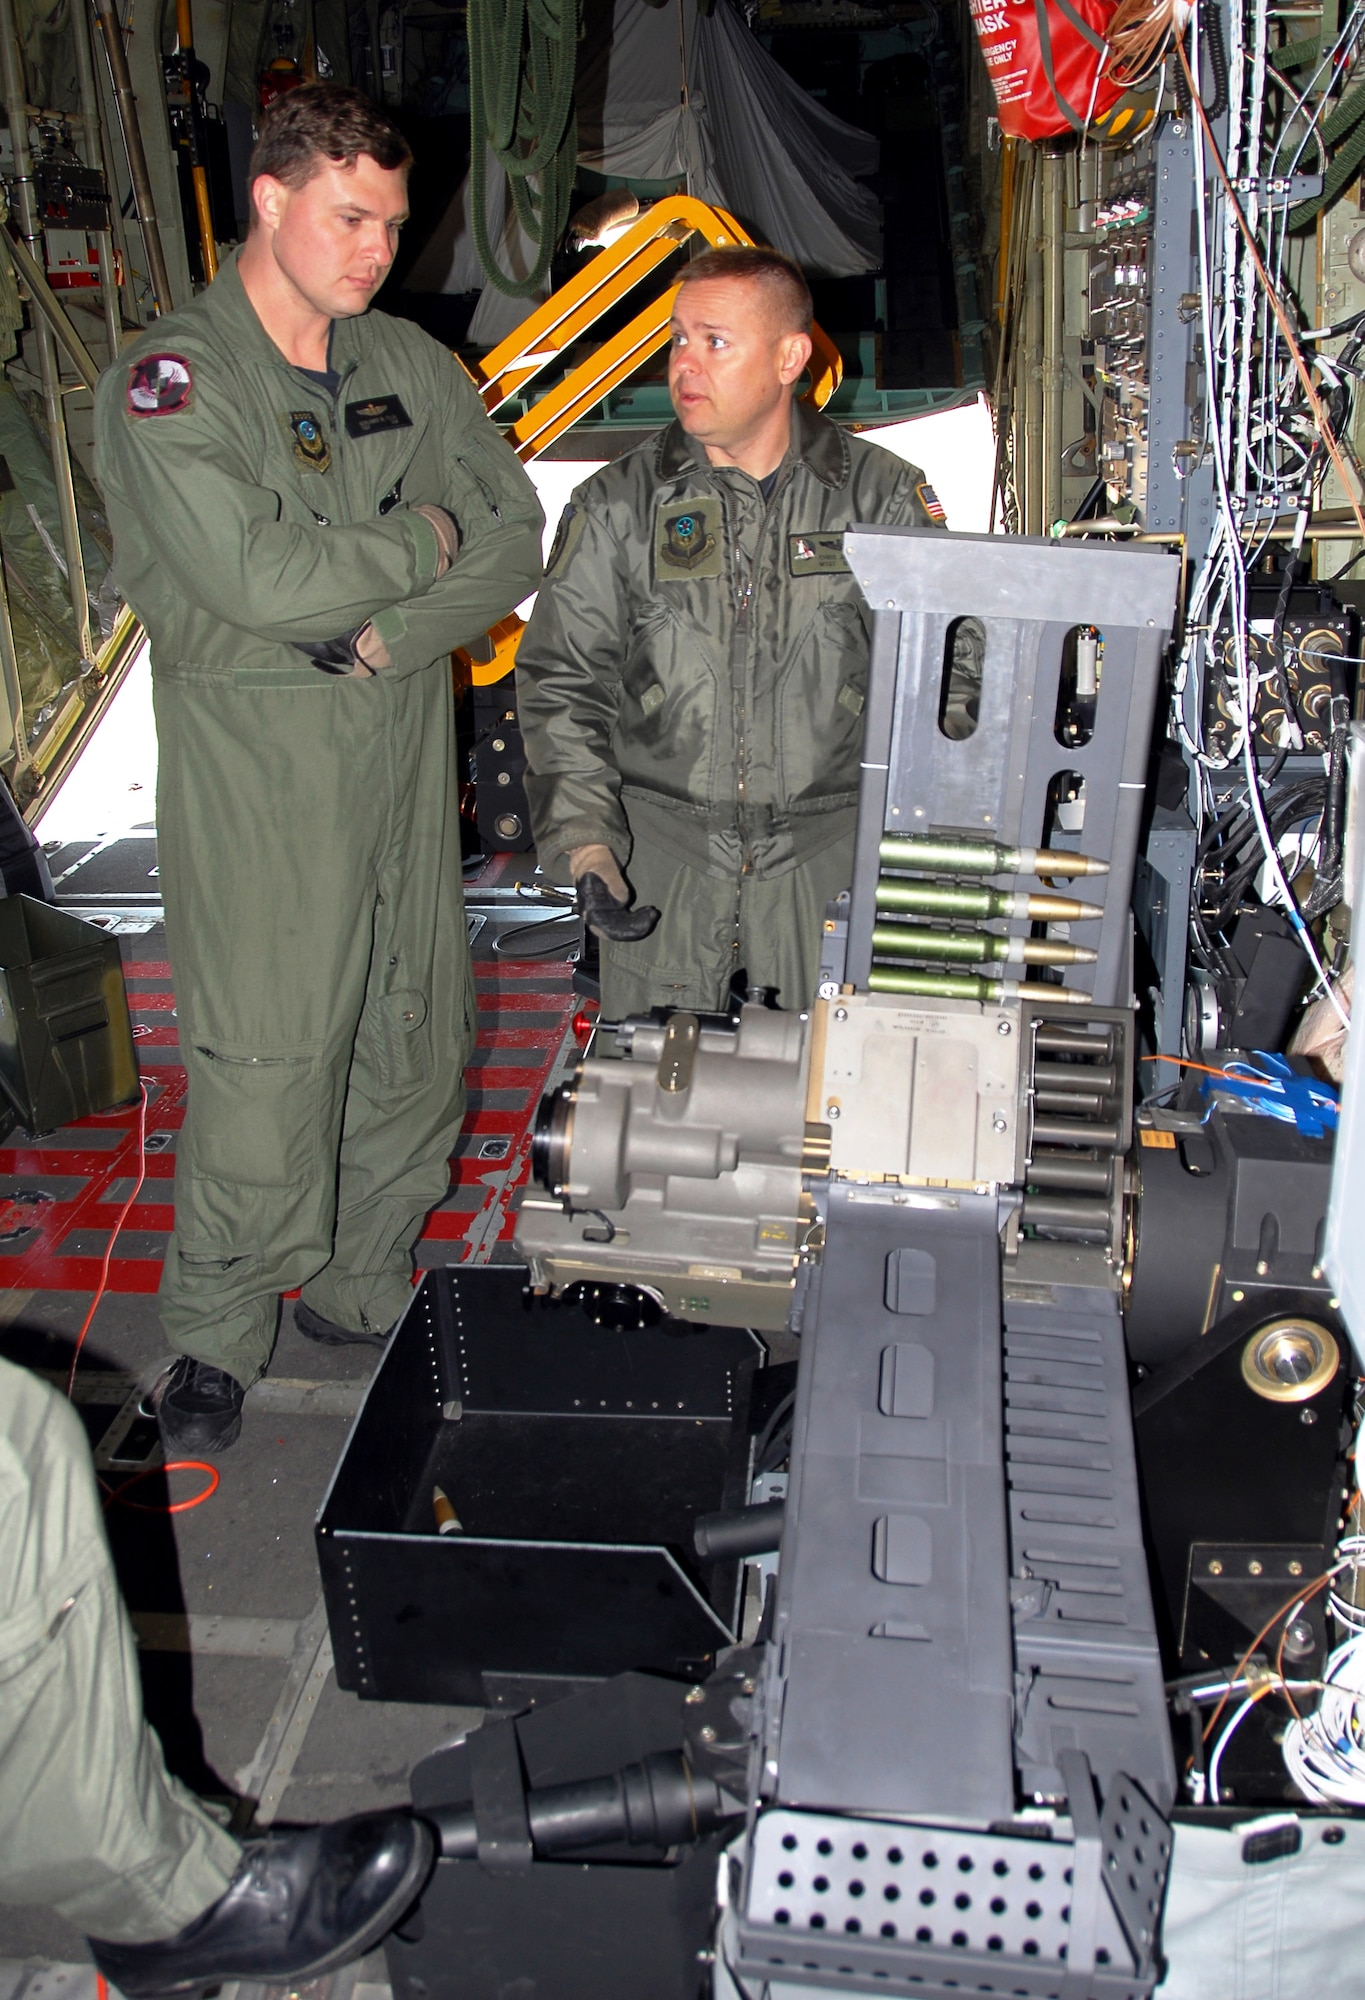 Tech. Sgt. Ben Filek and Master Sgt. Chris Jette look over a newly-installed 30 mm Bushmaster cannon aboard an AC-130U Spooky gunship Jan. 26 at Hurlburt Field, Fla. Sergeant Filek is an aerial gunner with the 19th Special Operations Squadron at Hurlburt Field. Sergeant Jette, also an aerial gunner, is with the 1st Special Operations Group standardization/evaluation section at Hurlburt Field. The 30 mm gun will eventually replace both the 40 mm cannon and 25 mm gun on U-model gunships. (U.S. Air Force photo/Chief Master Sgt. Gary Emery)
